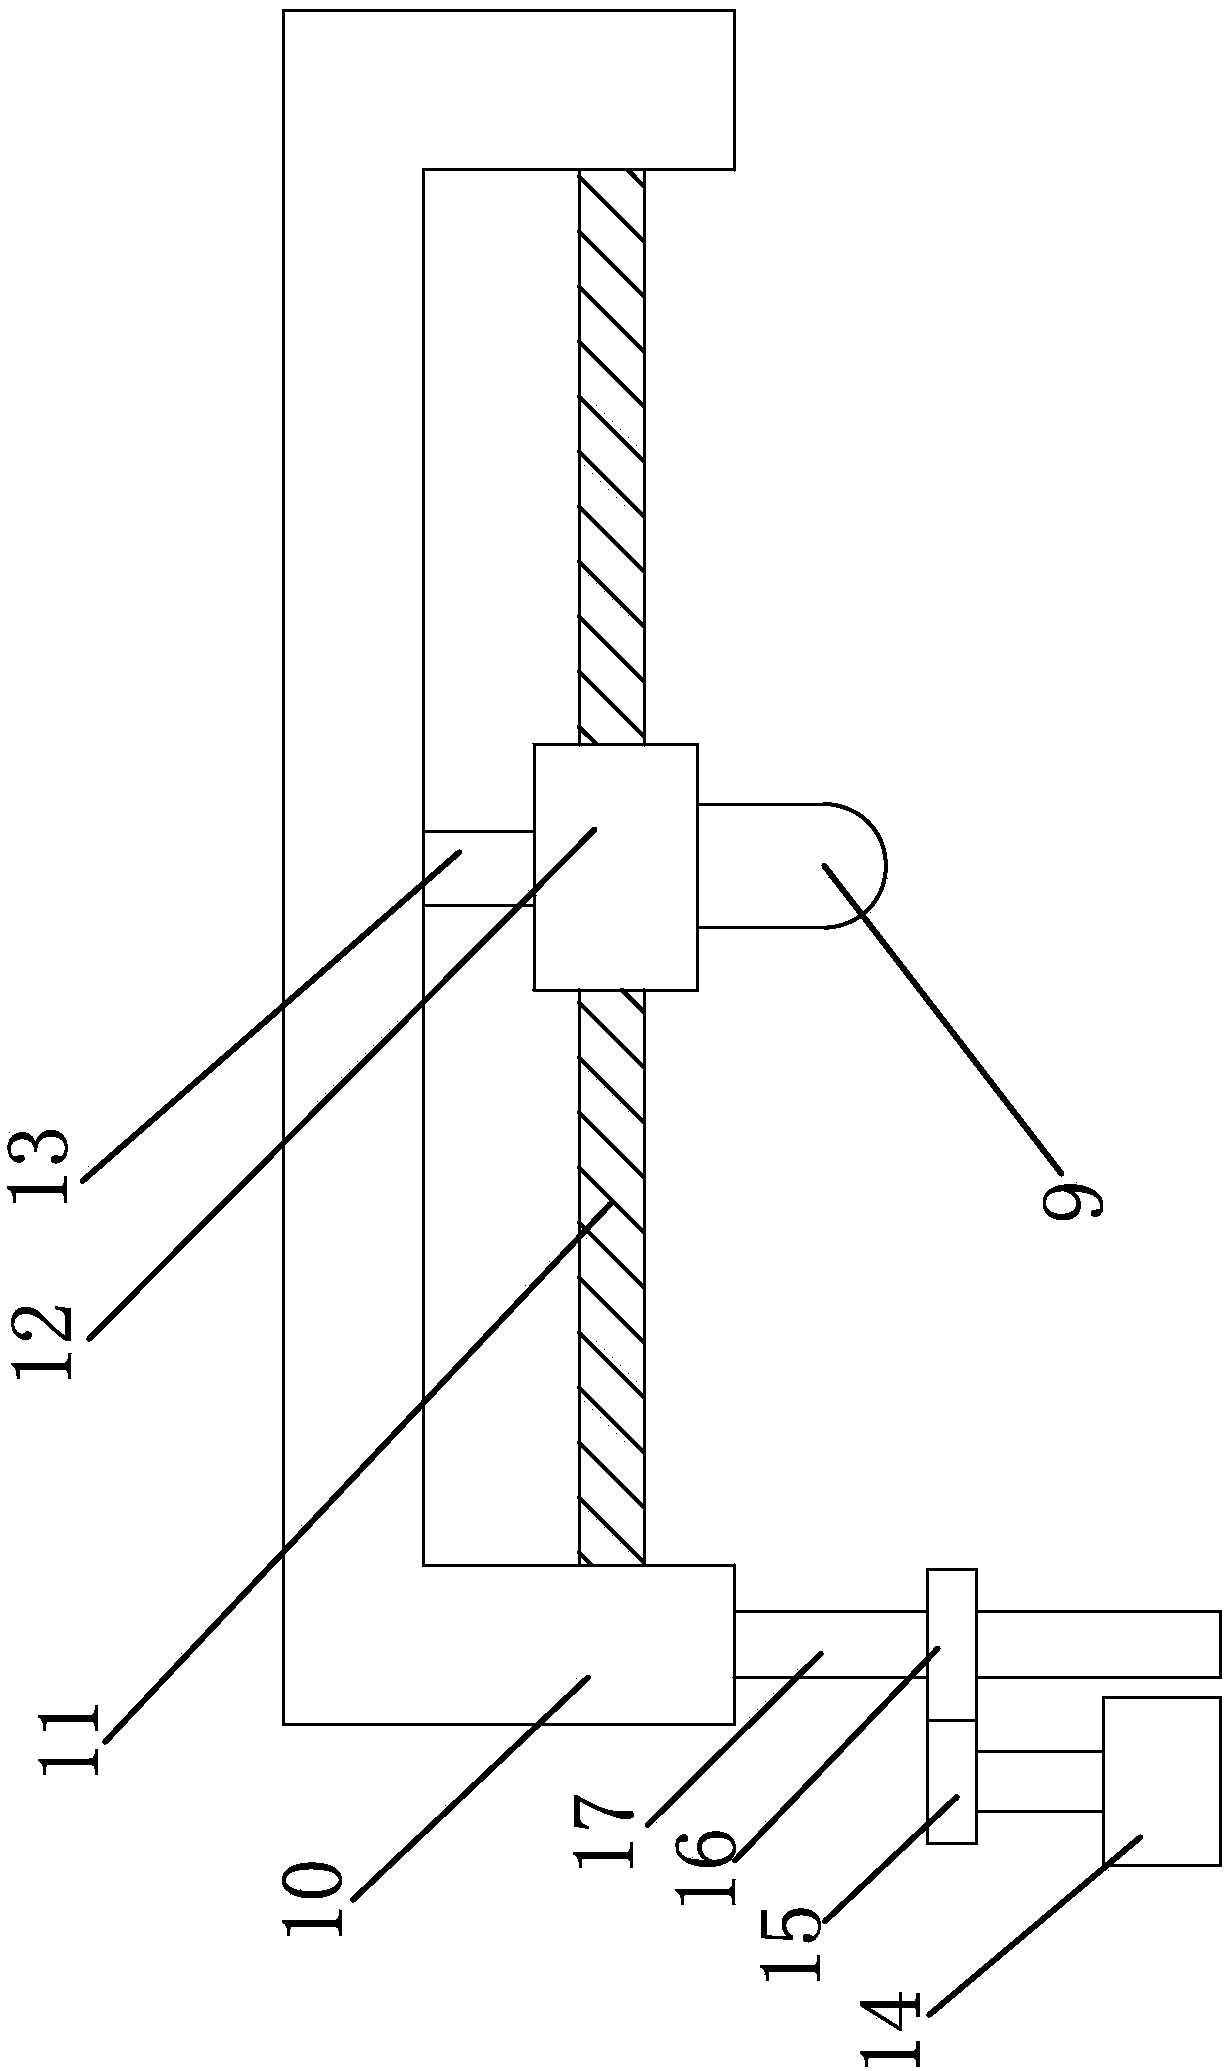 Transverse cutting mechanism of buckle plate cutting device